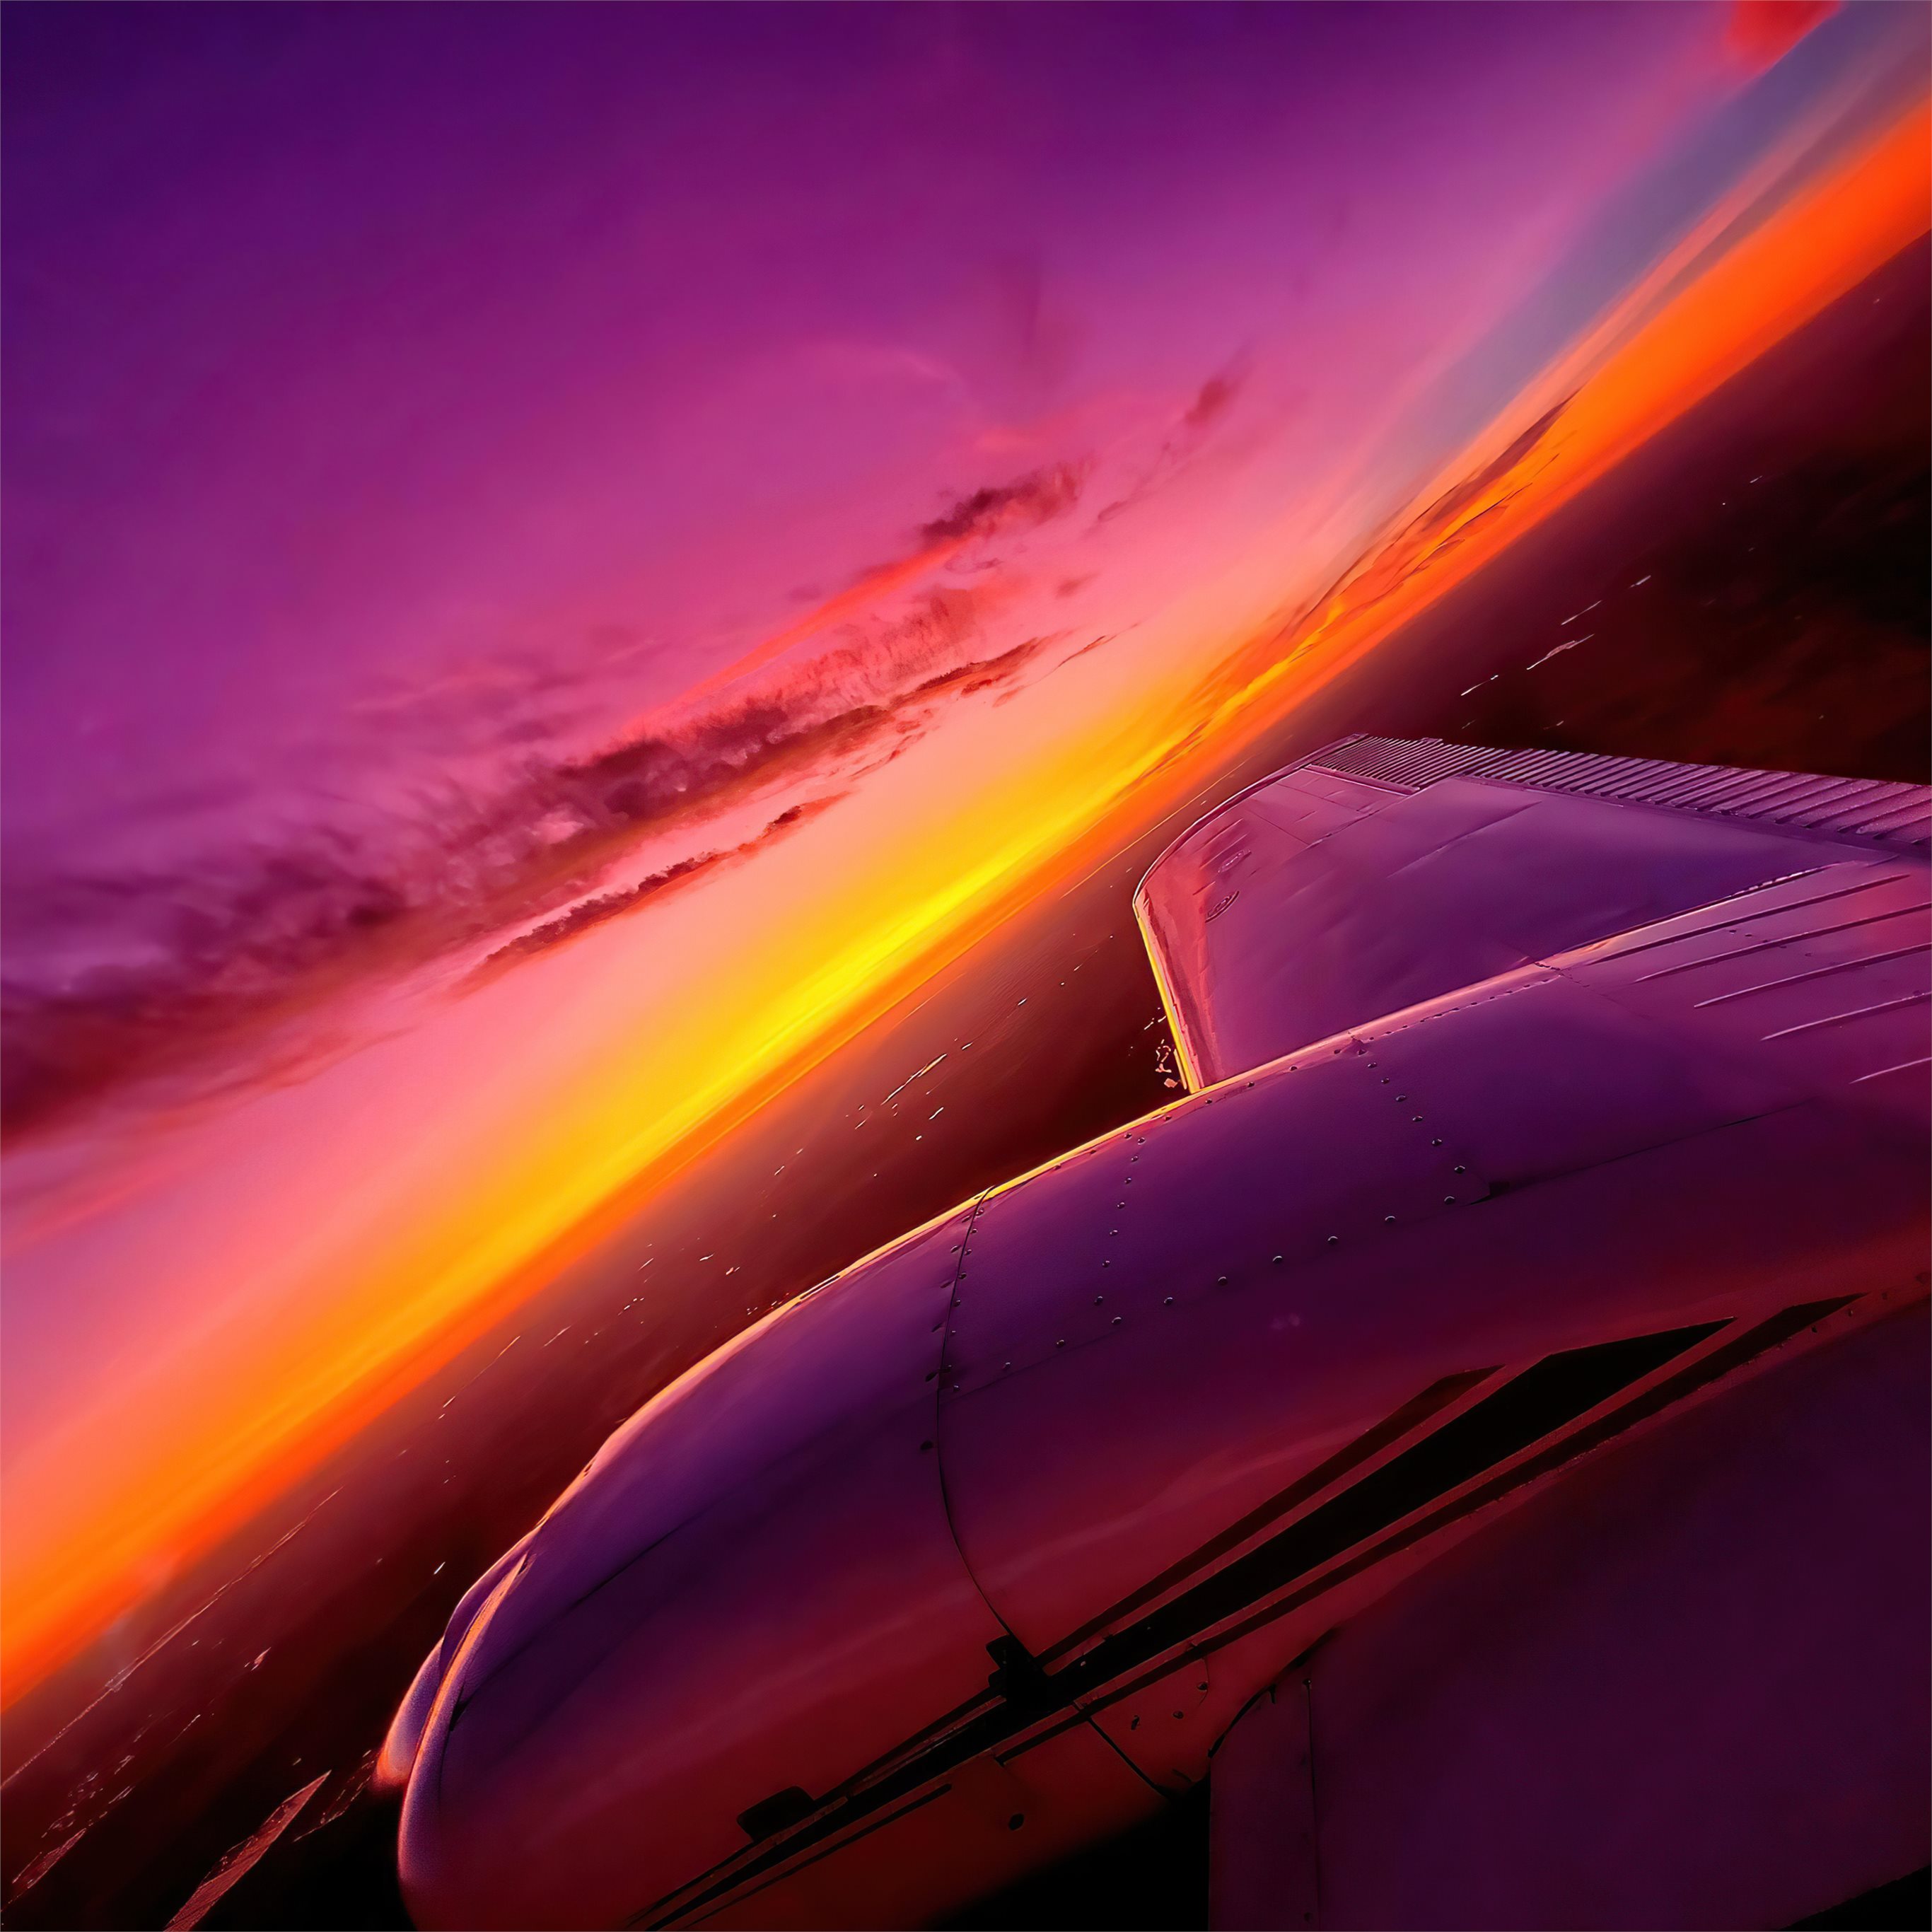 synthwave sunset plane view 4k iPad Air Wallpaper Free Download